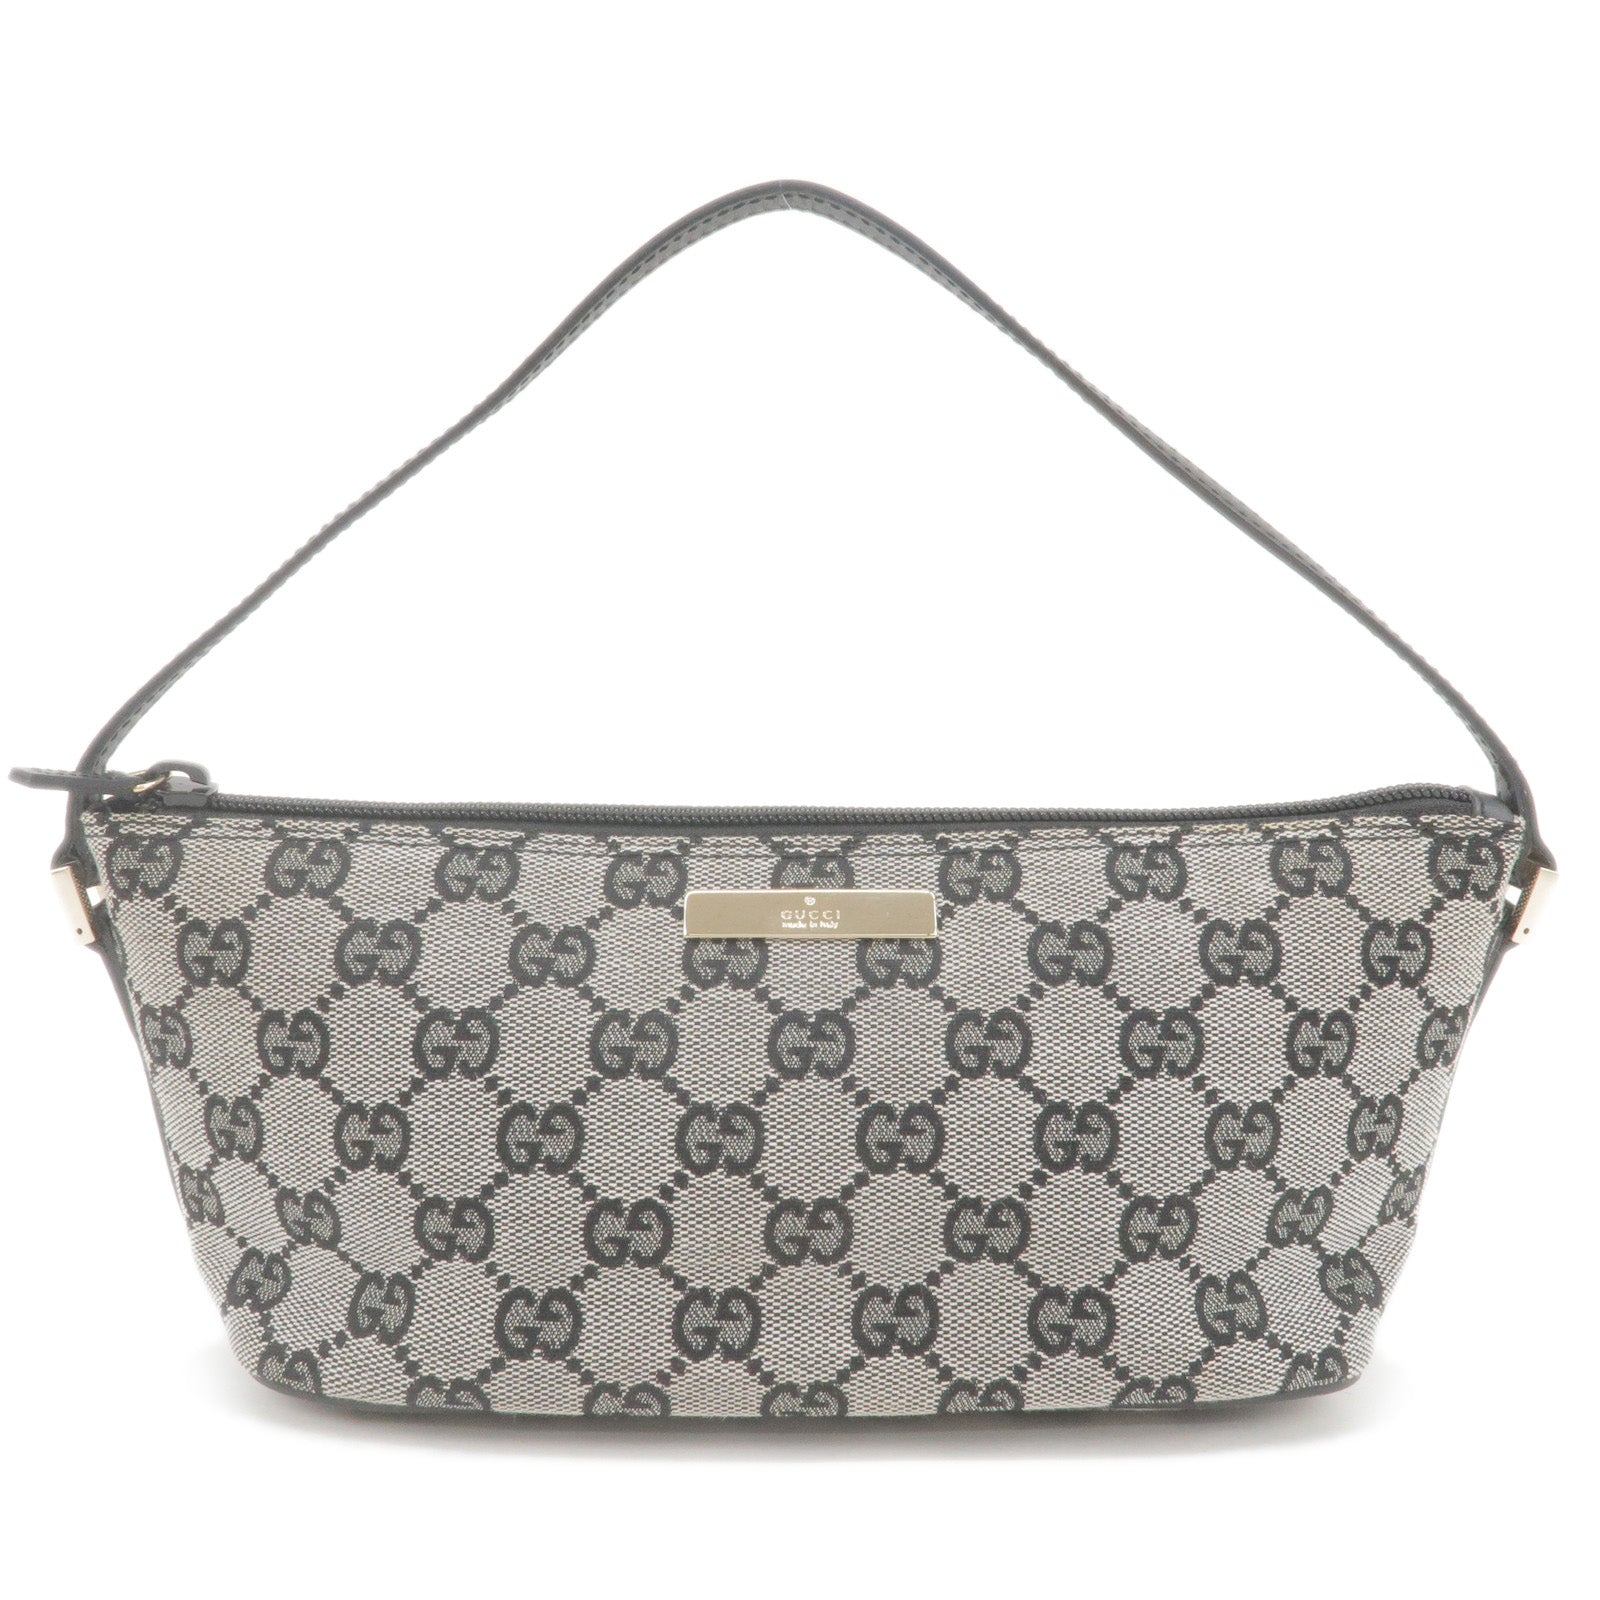 GUCCI-Boat-Bag-GG-Canvas-Leather-Hand-Bag-Black-White-039-1103